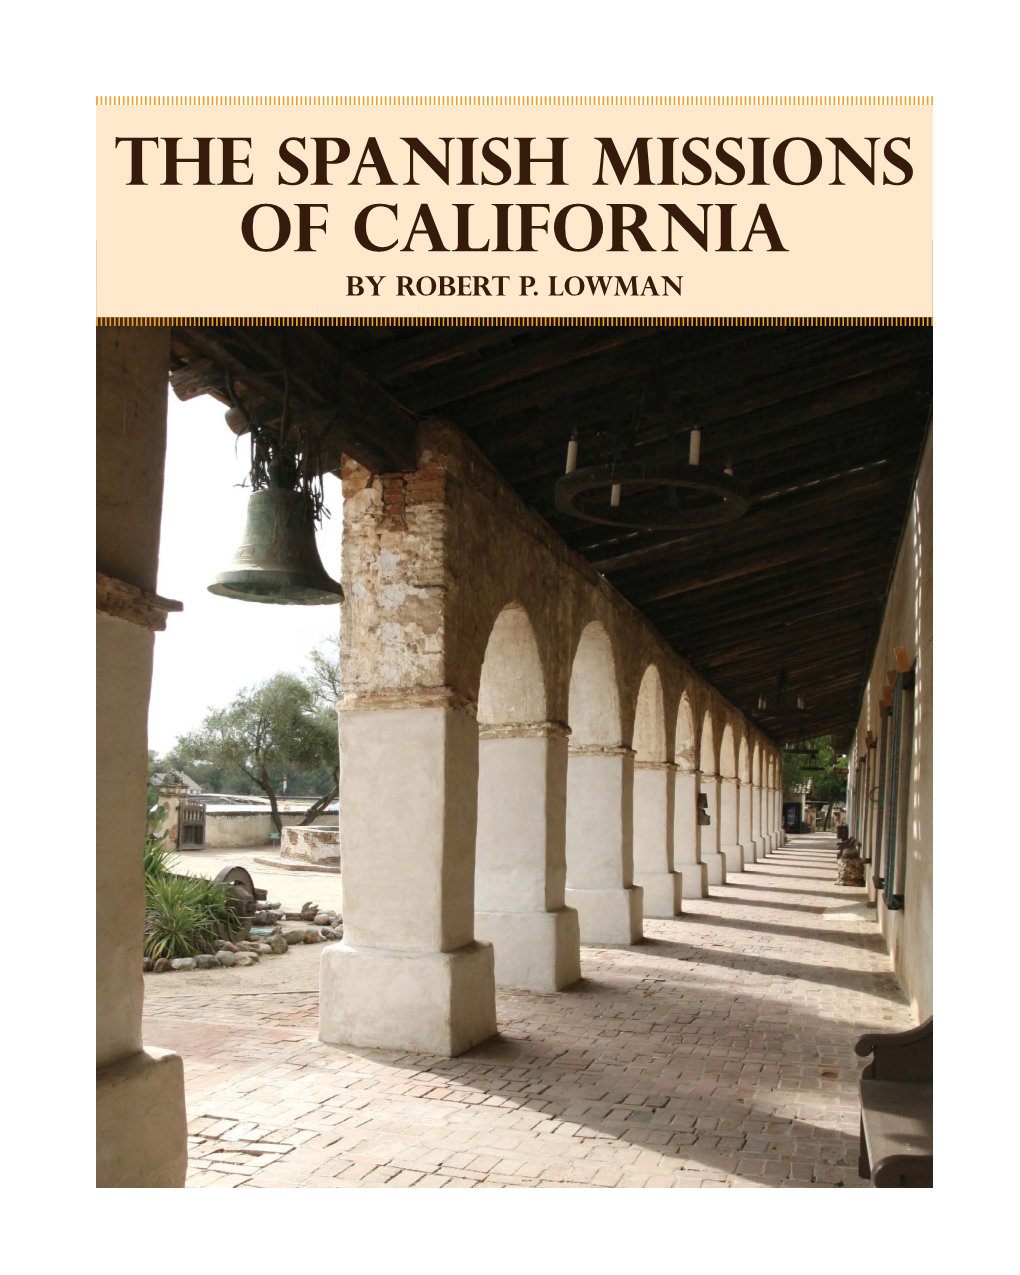 The Spanish Missions of California by Robert P